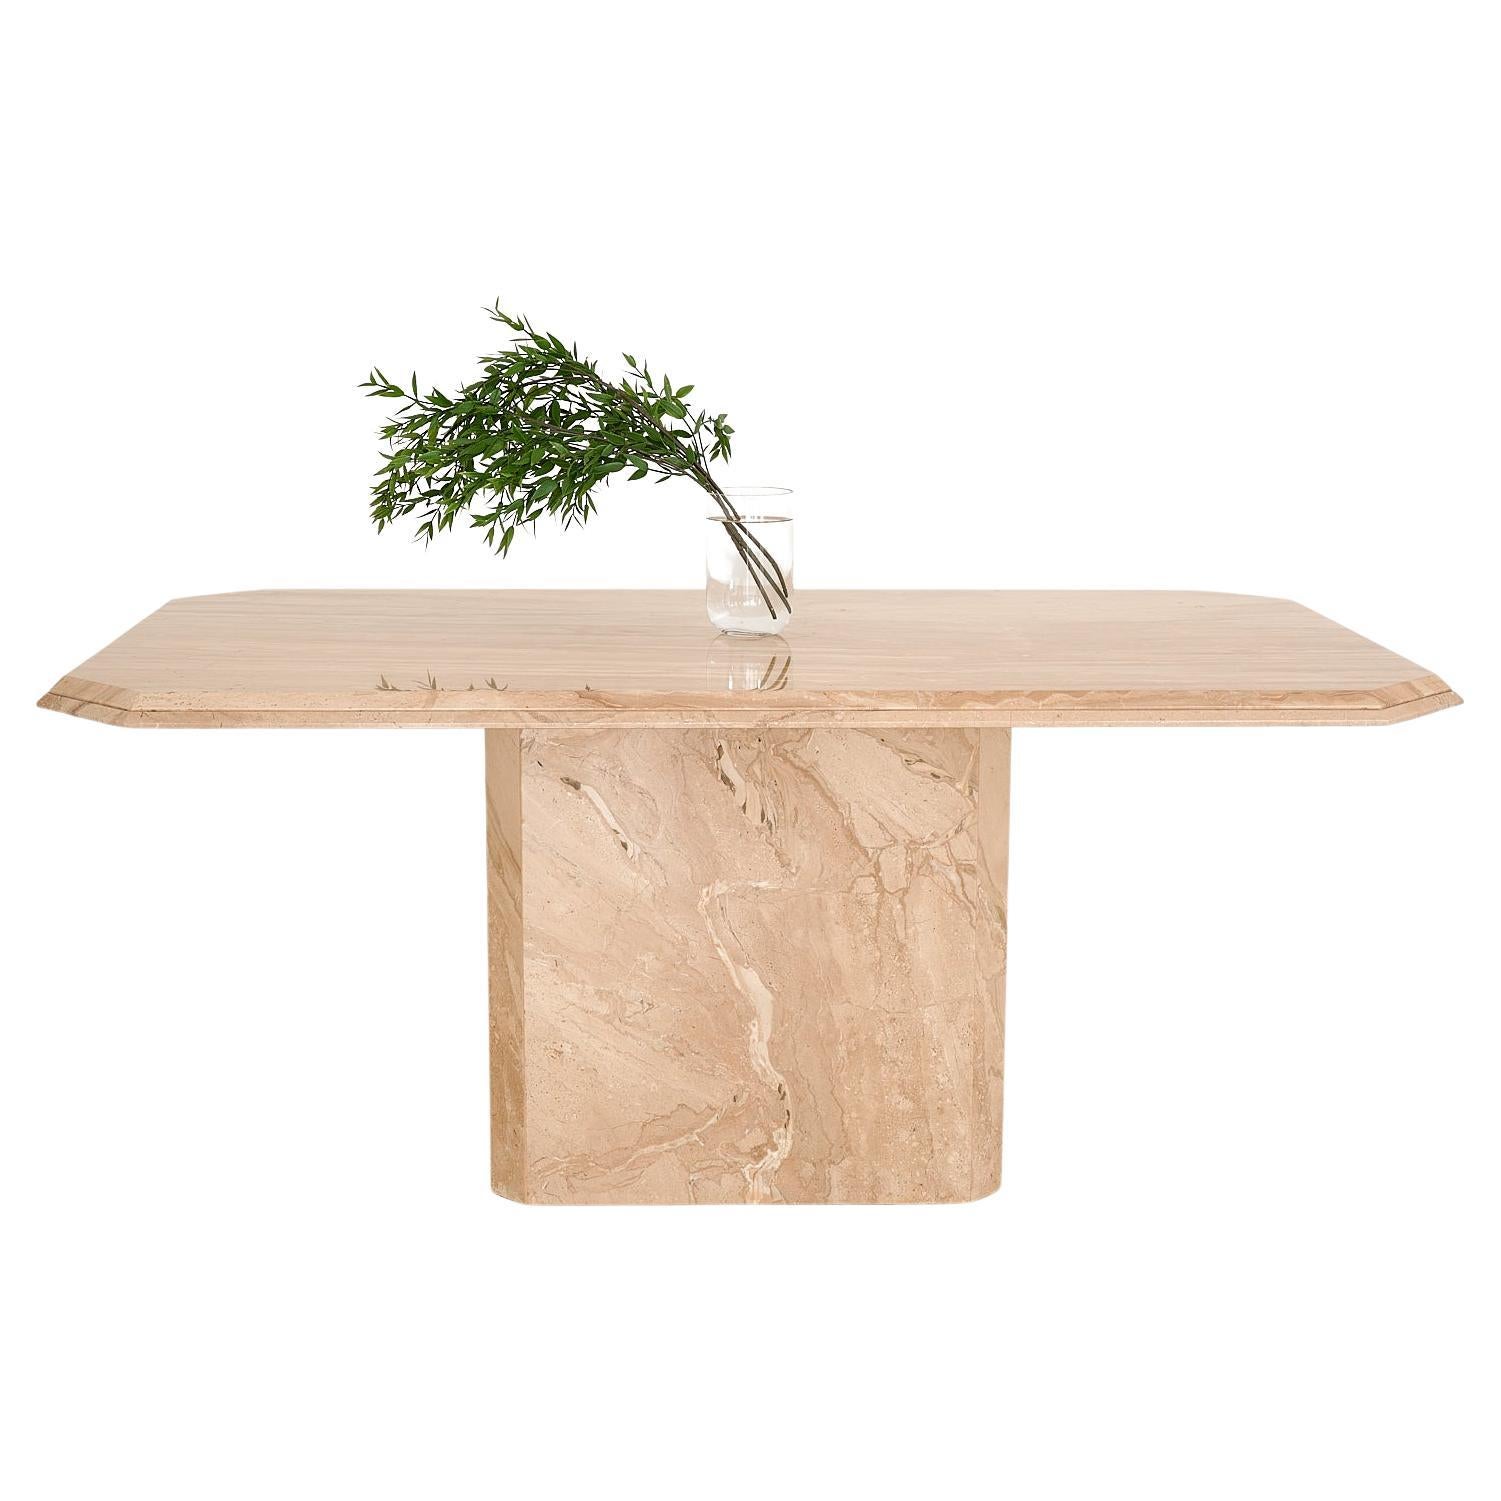 Vintage Cream Marble Dining Table